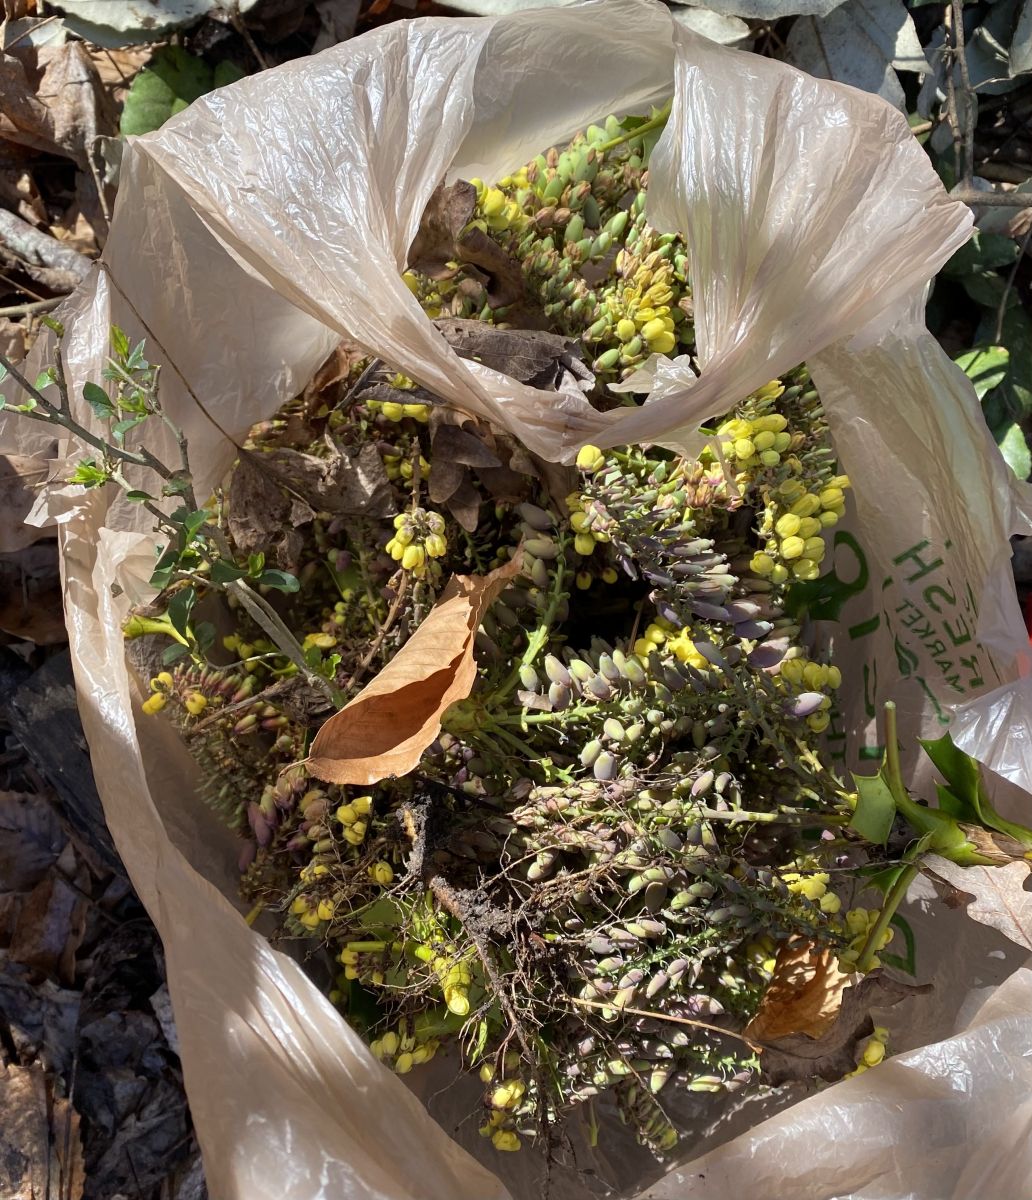 Mahonia branches and berries in plastic bag